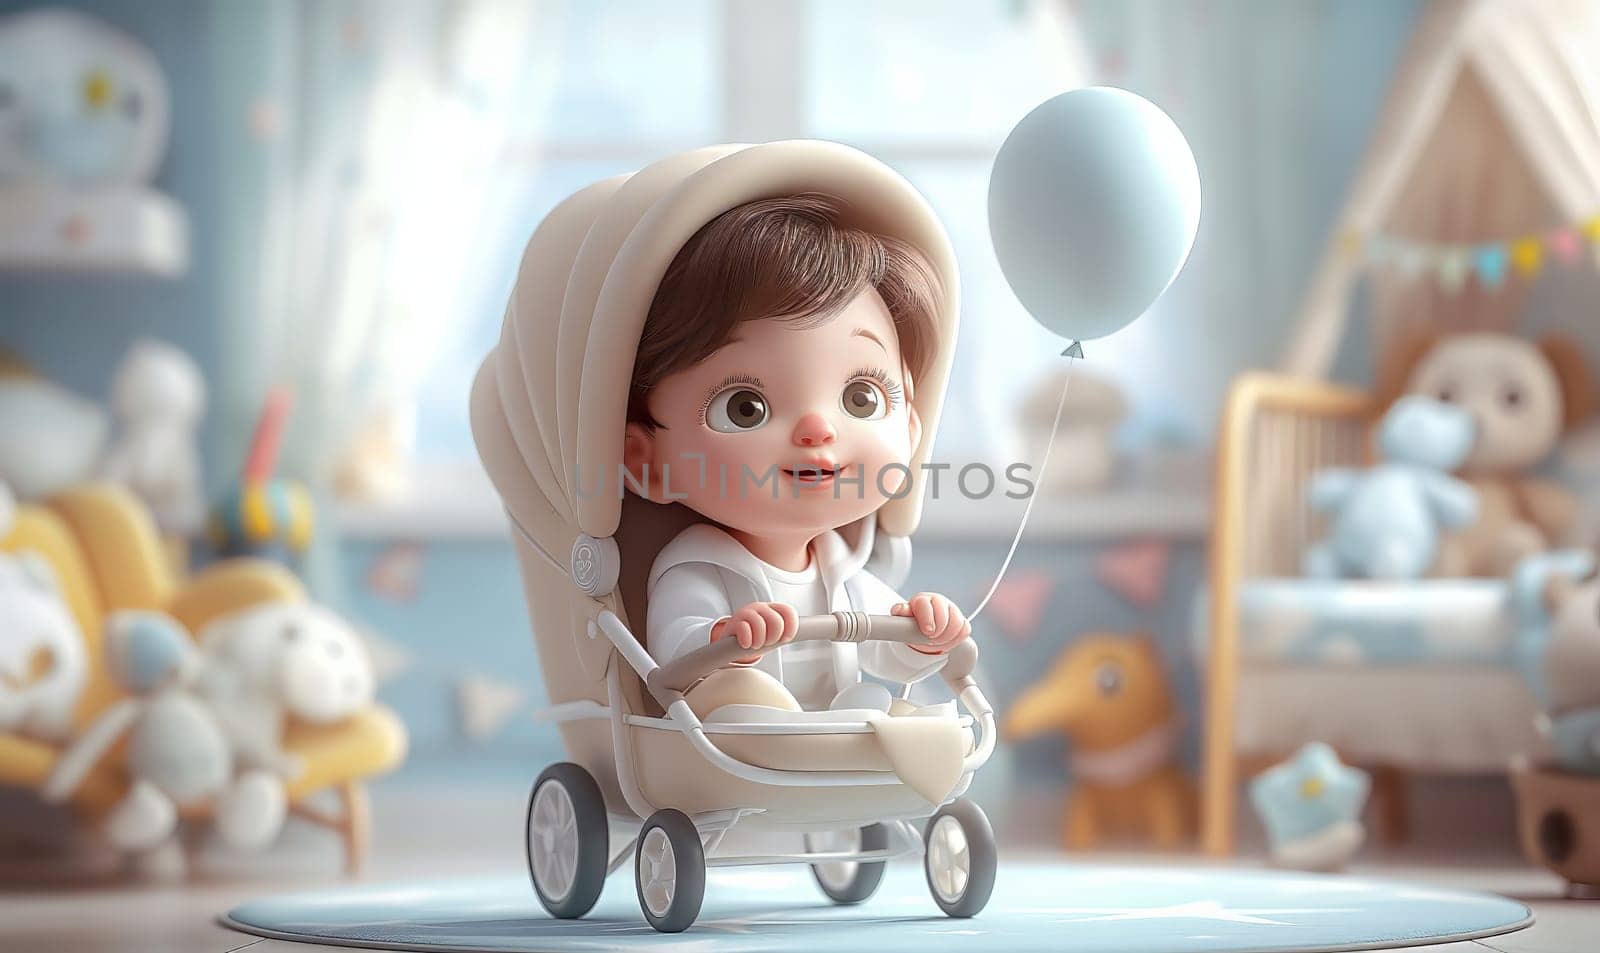 Illustration of a child sitting in a stroller in a room. by Fischeron